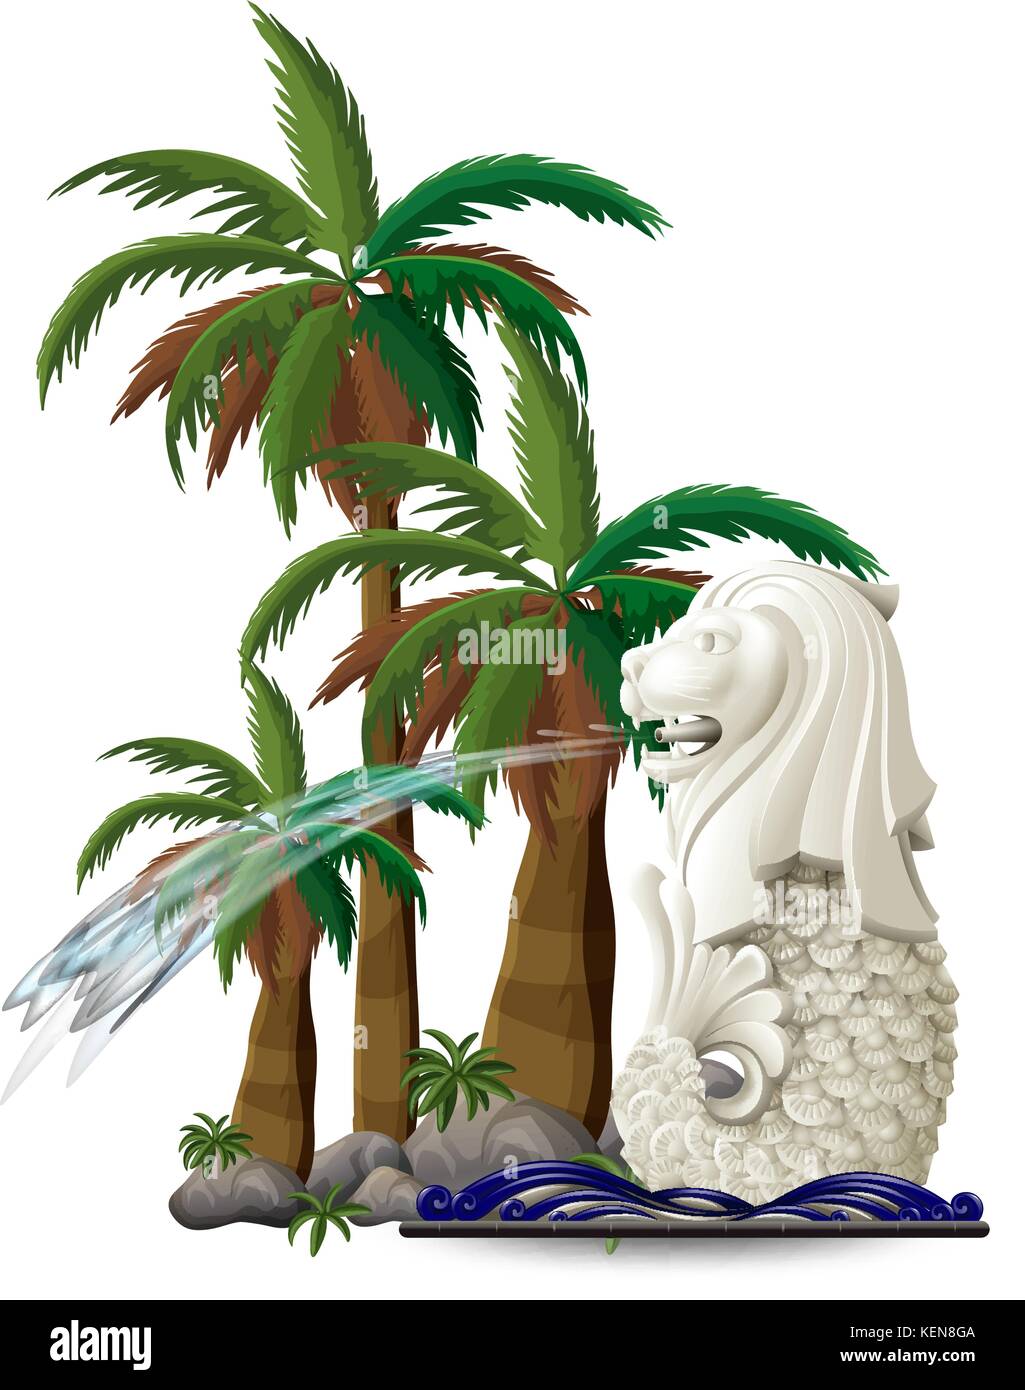 Illustration of the statue of Merlion near the palm trees on a white background Stock Vector